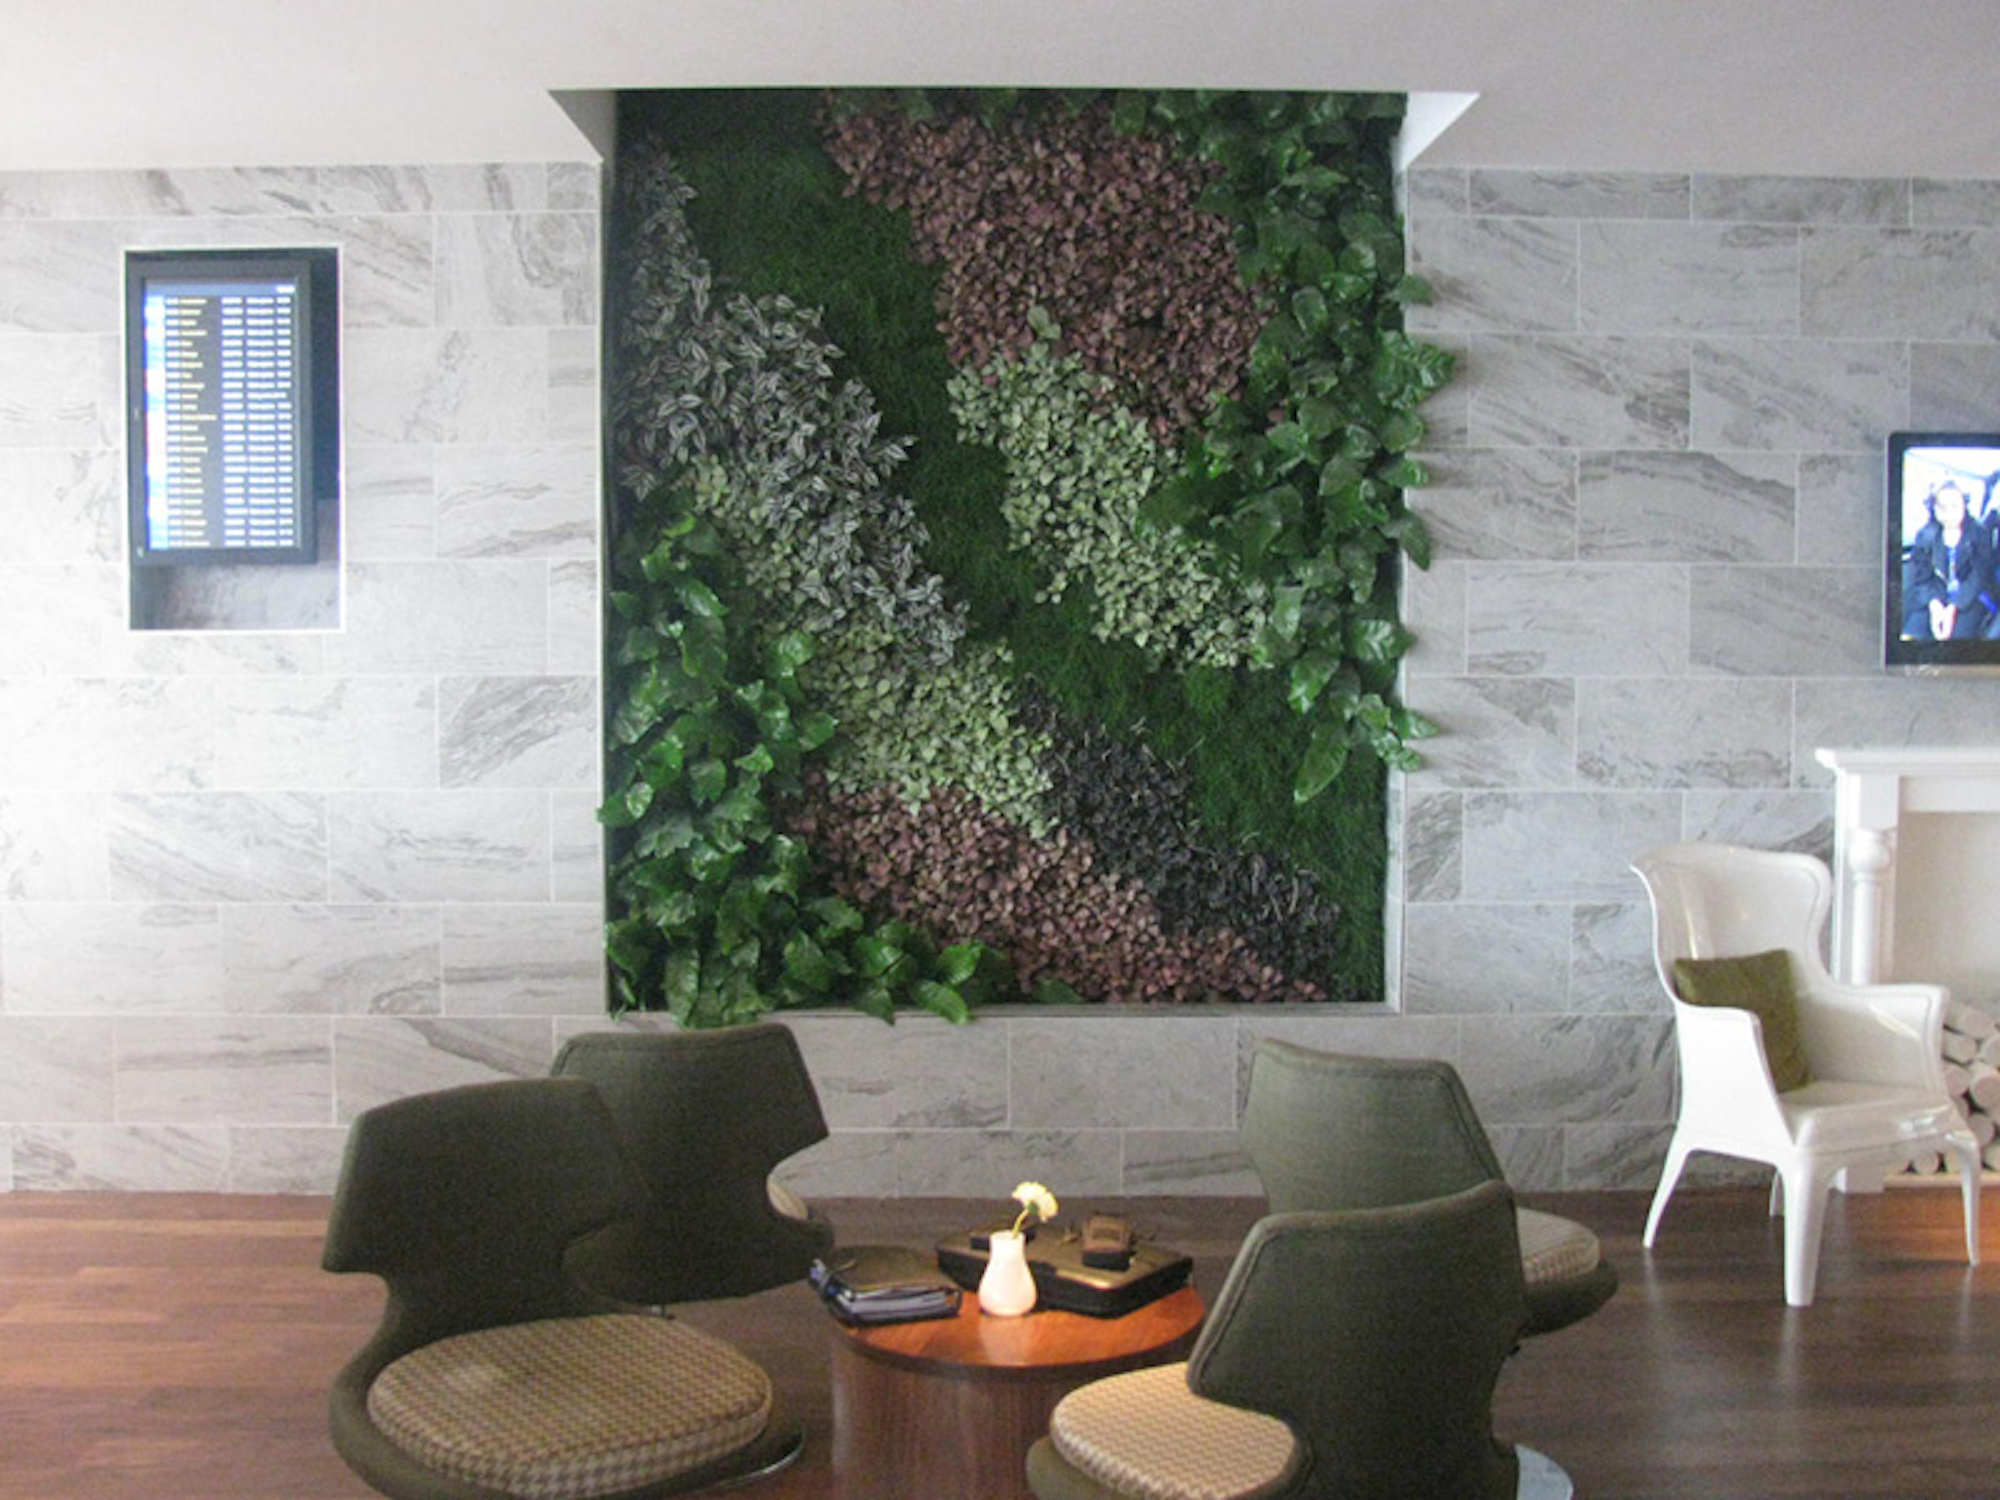 seating in airport lounge with living wall